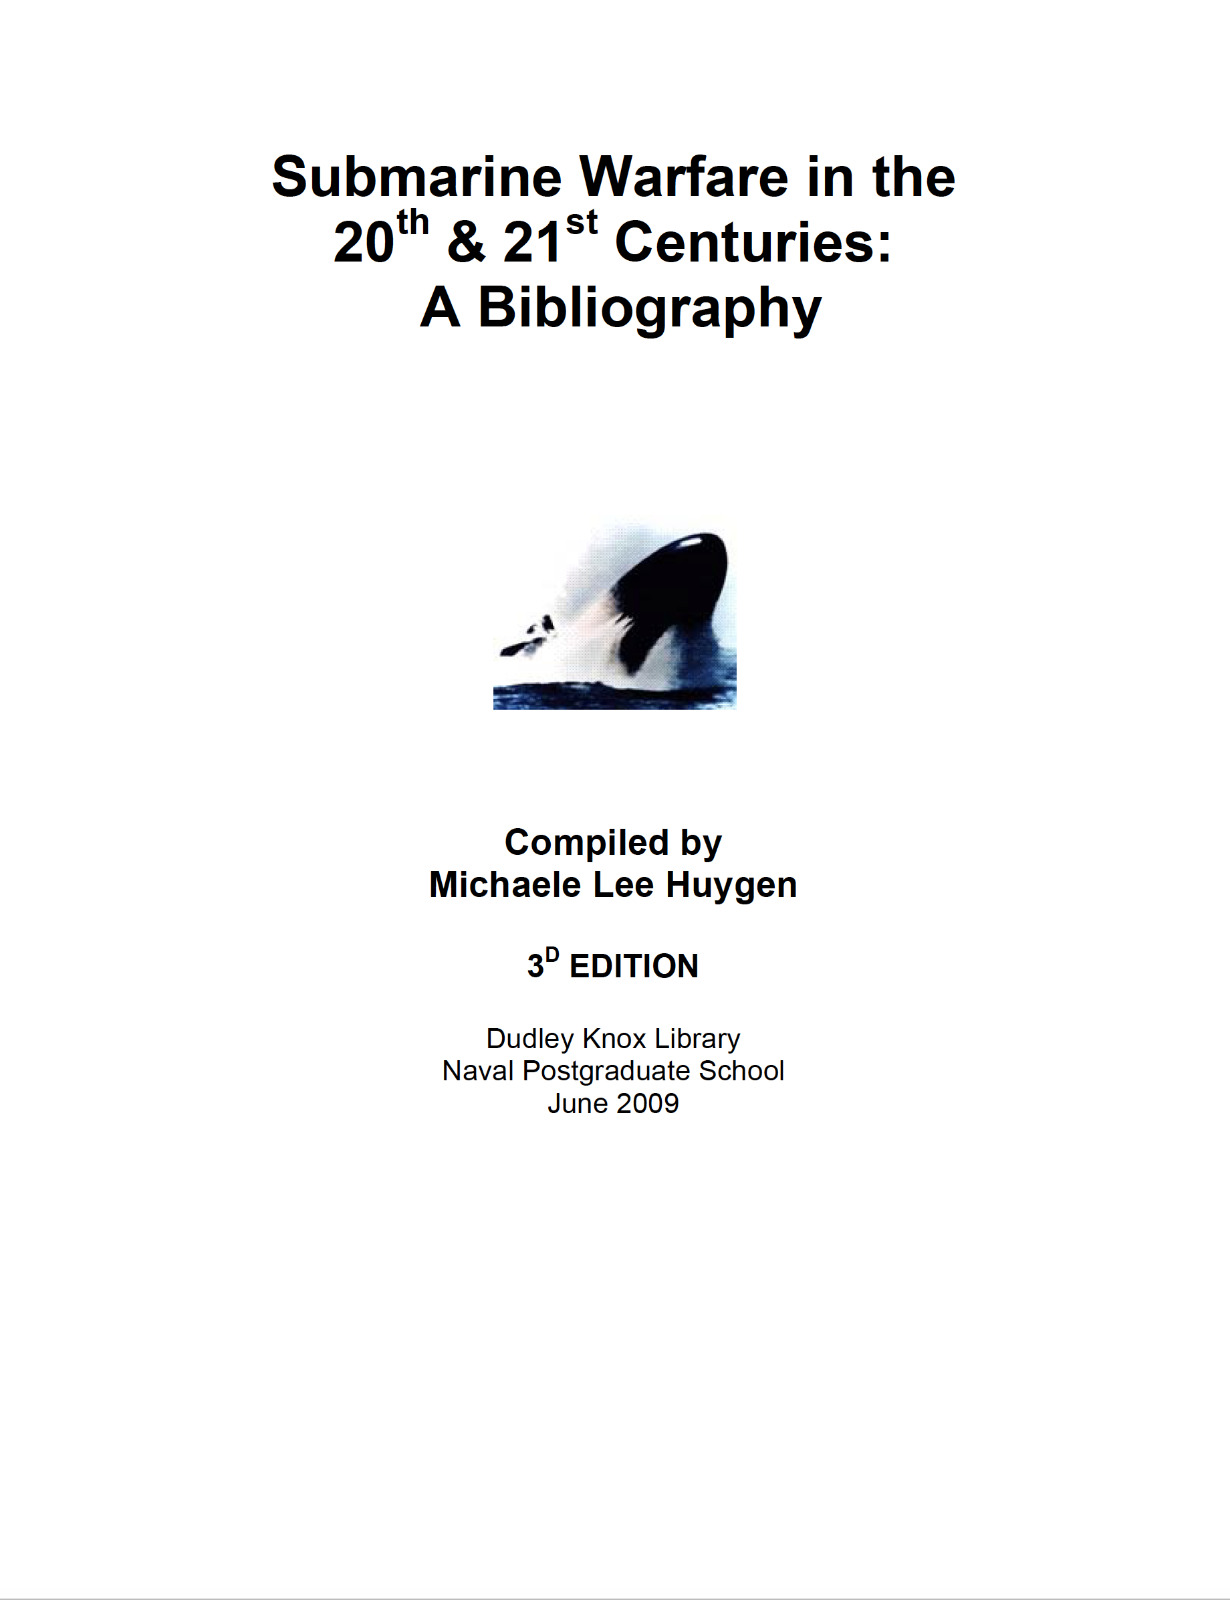 814 Page Submarine Warfare 20th & 21st Centuries A Bibliography 3d ed Book on CD